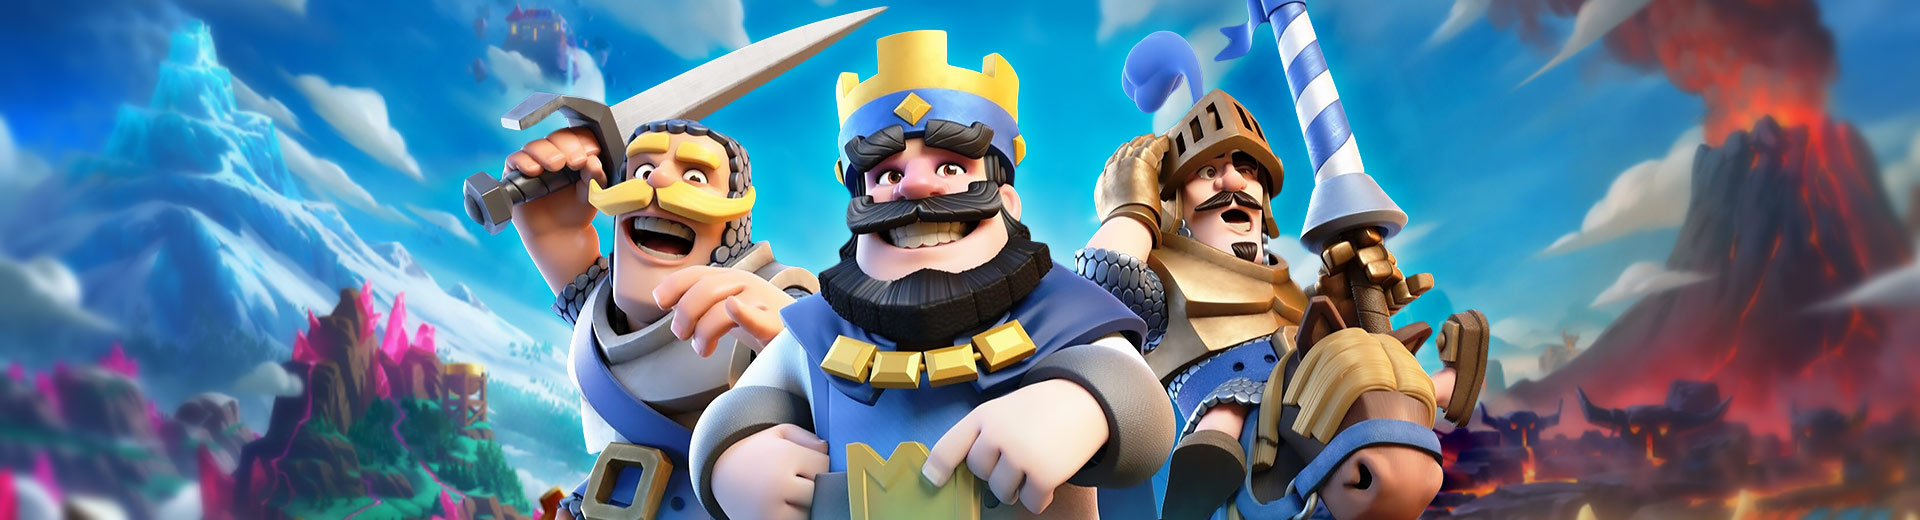 clash royale game online free